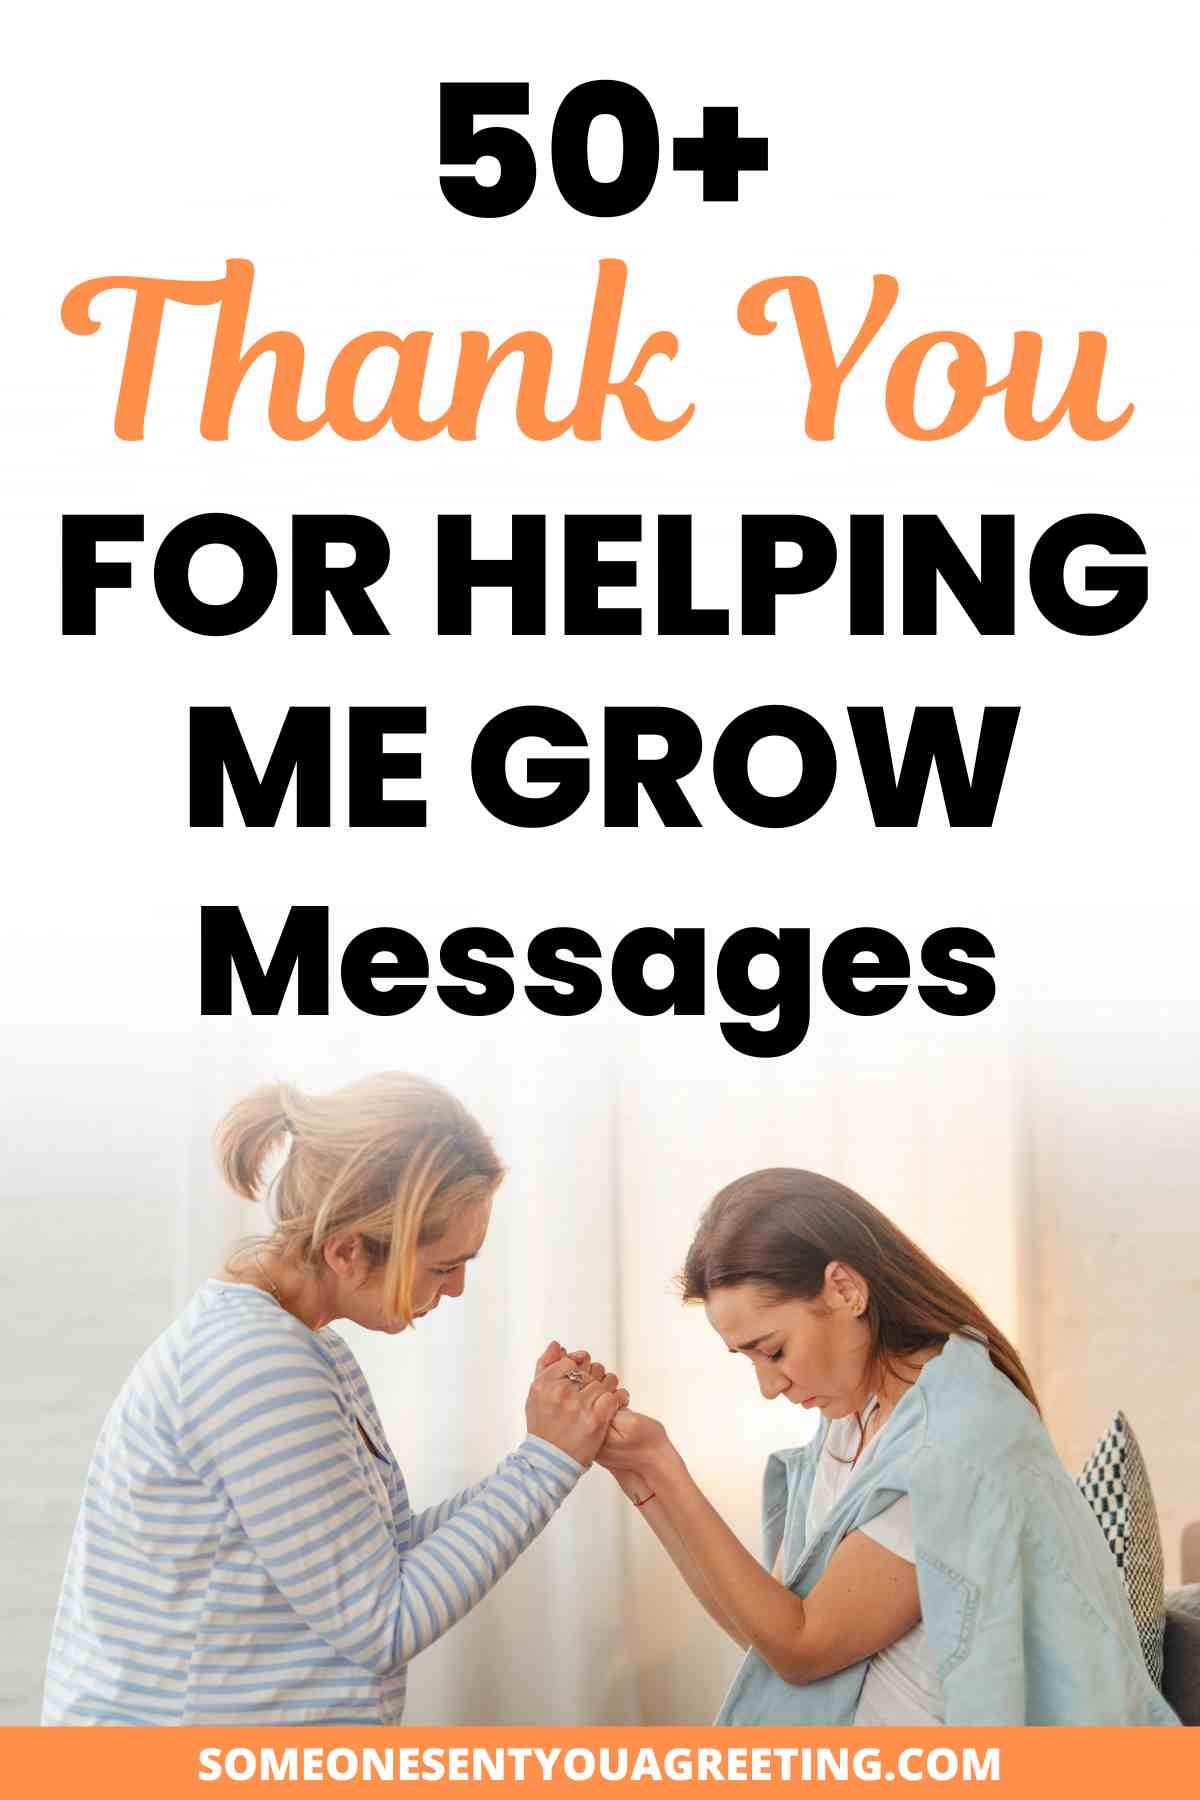 thank you for helping me grow messages